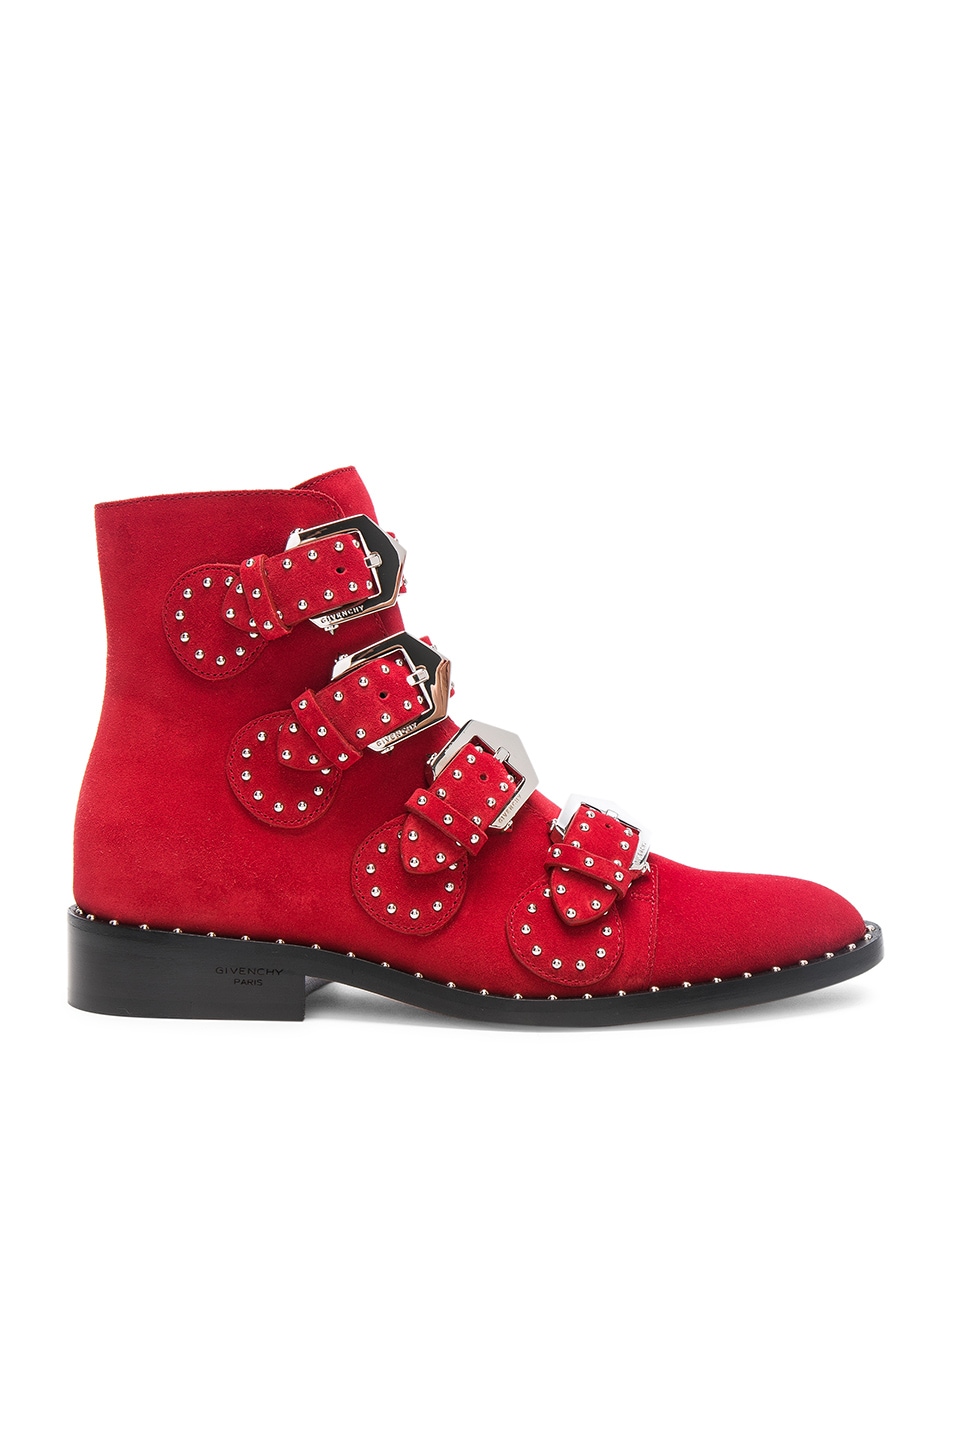 Image 1 of Givenchy Elegant Studded Suede Ankle Boots in Red